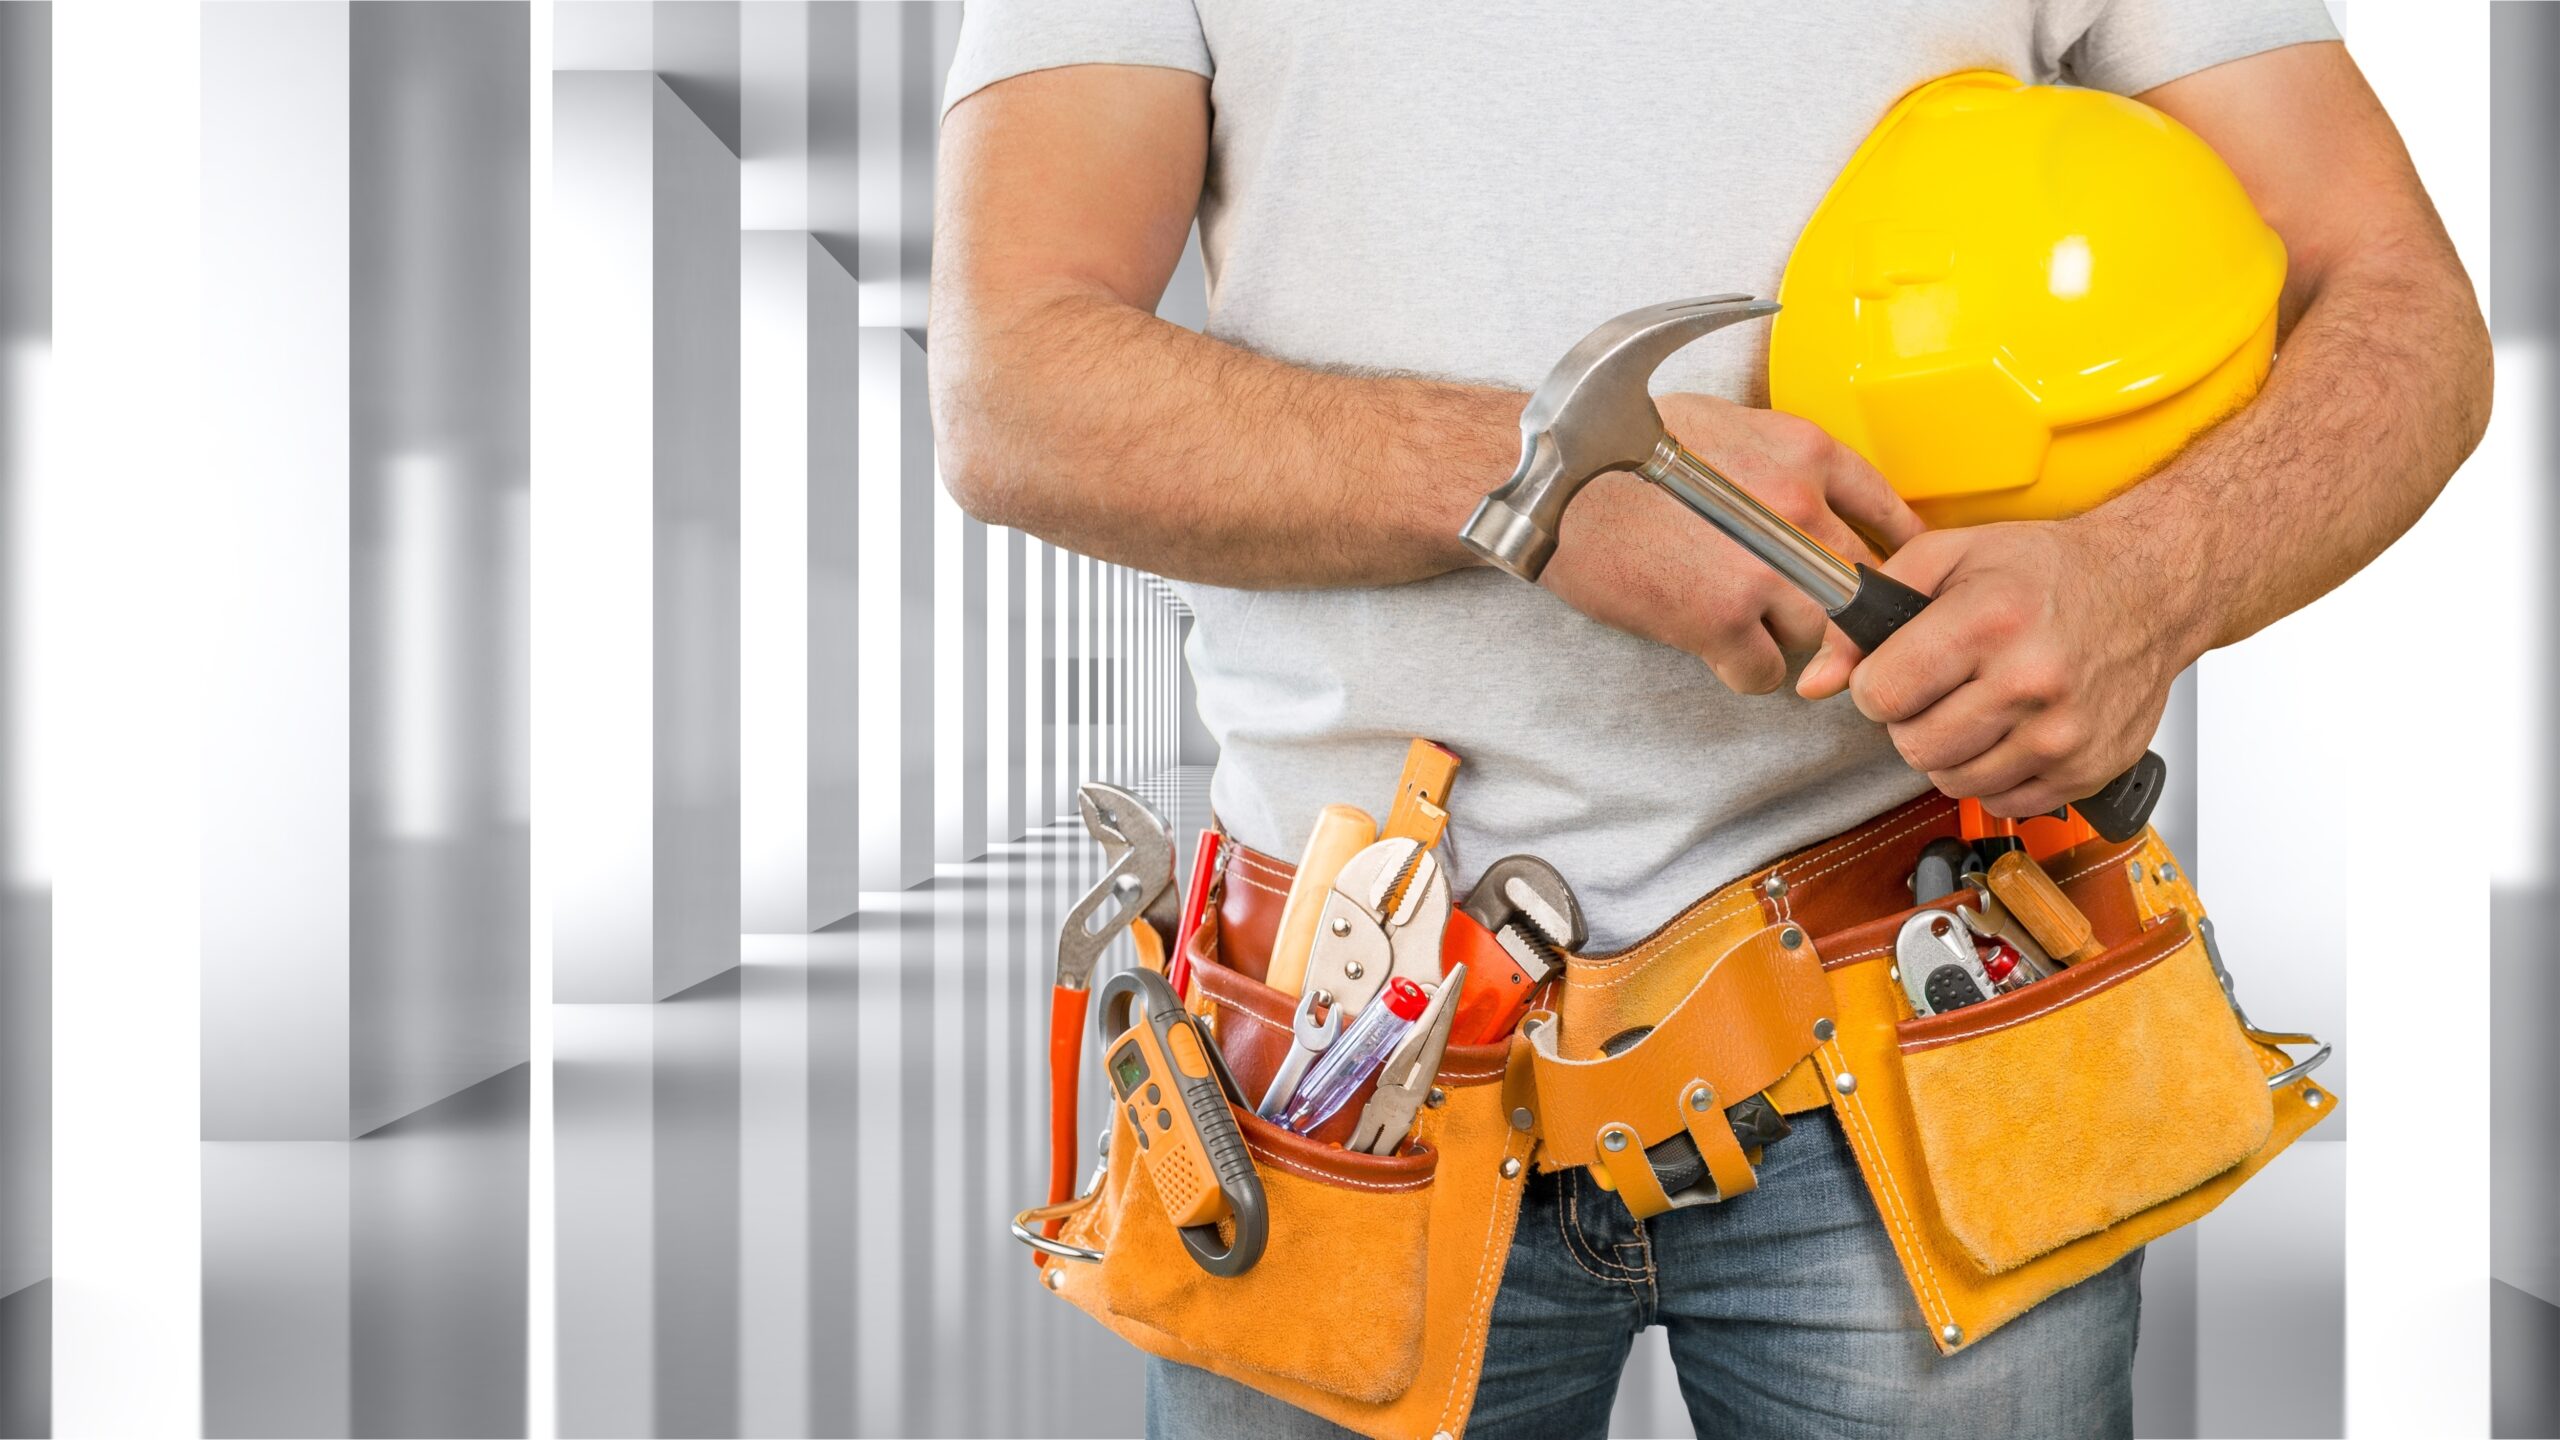 General Contractor License Requirements by State: A Comprehensive Guide